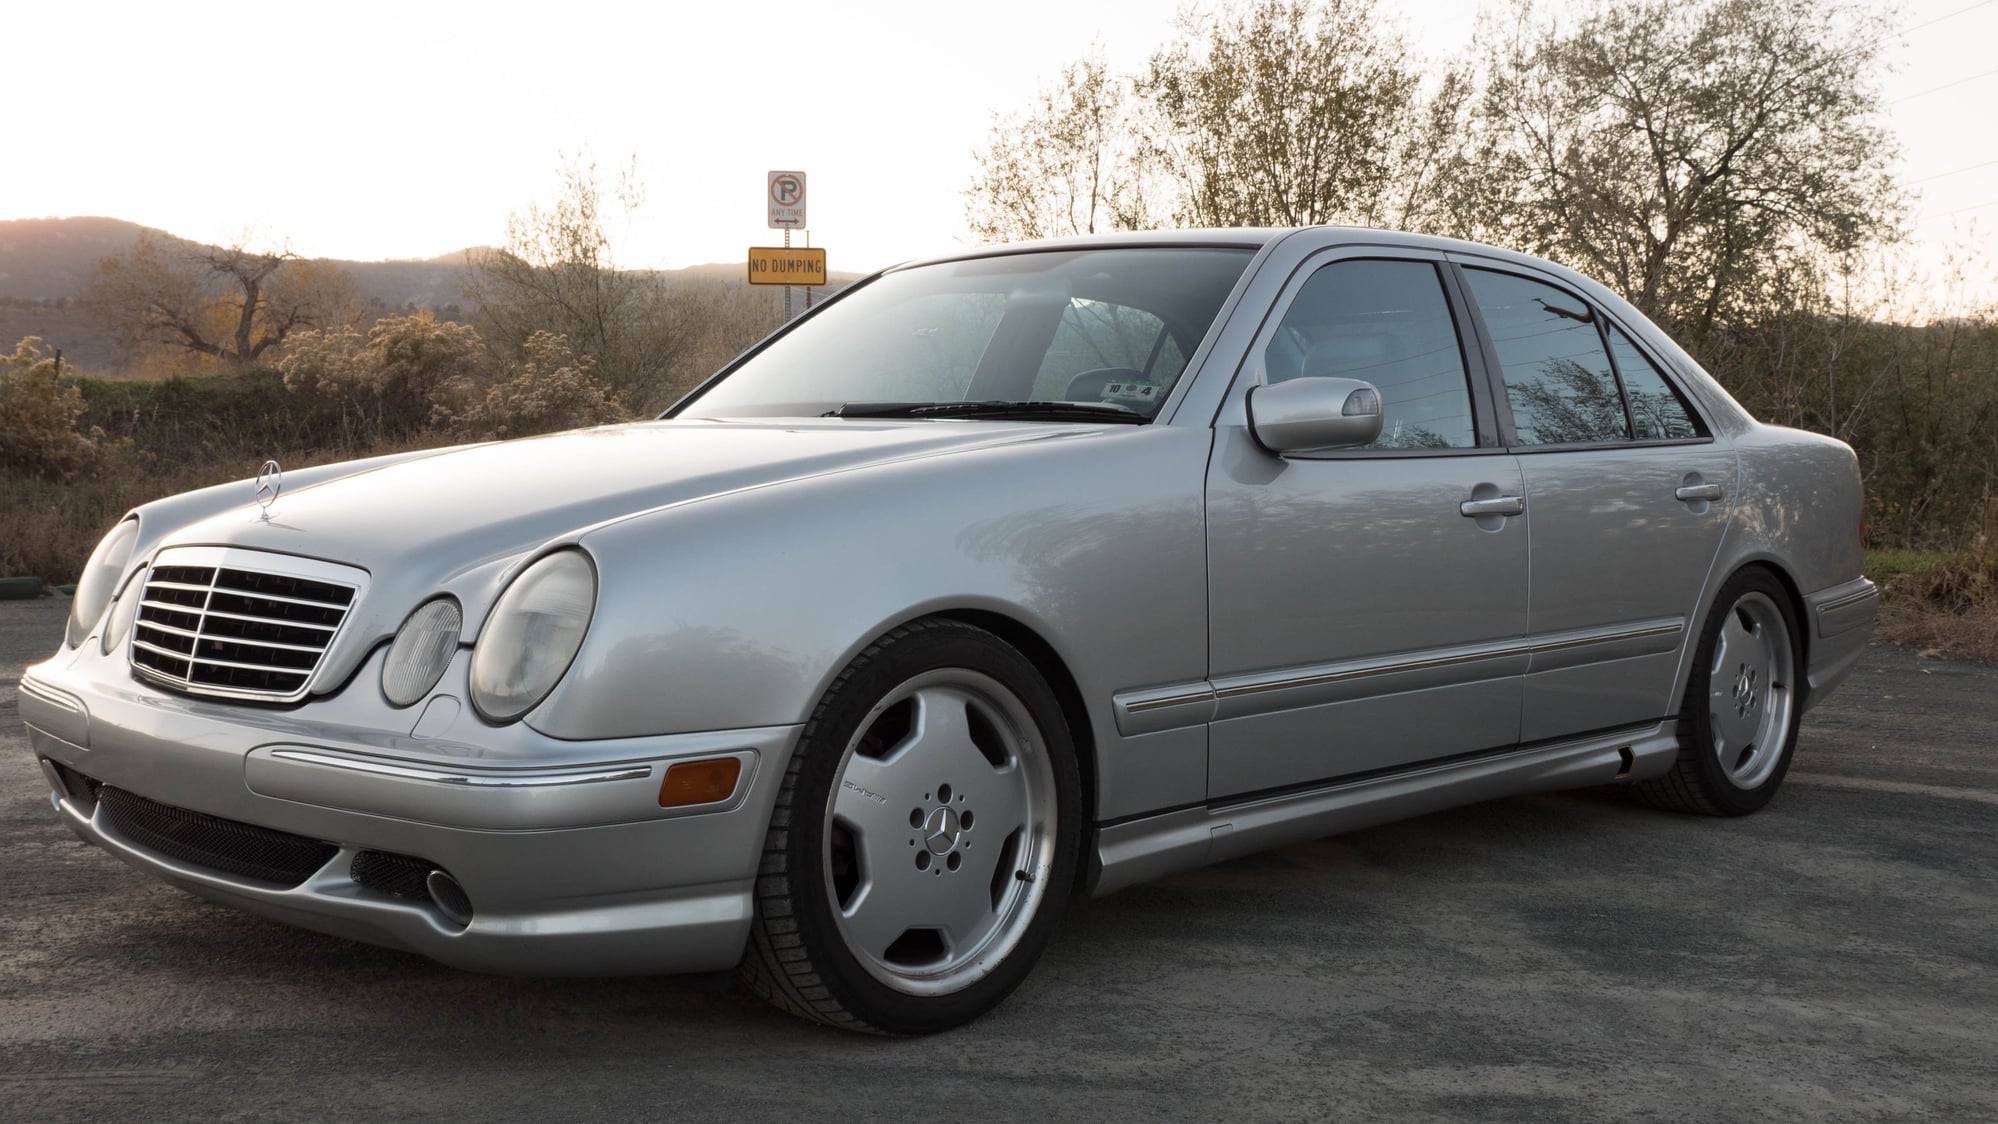 2001 Mercedes-Benz E55 AMG - 2001 E55 AMG - Used - VIN WDBJF74J71B363849 - 132,000 Miles - 8 cyl - 2WD - Automatic - Sedan - Silver - Fort Collins, CO 80526, United States